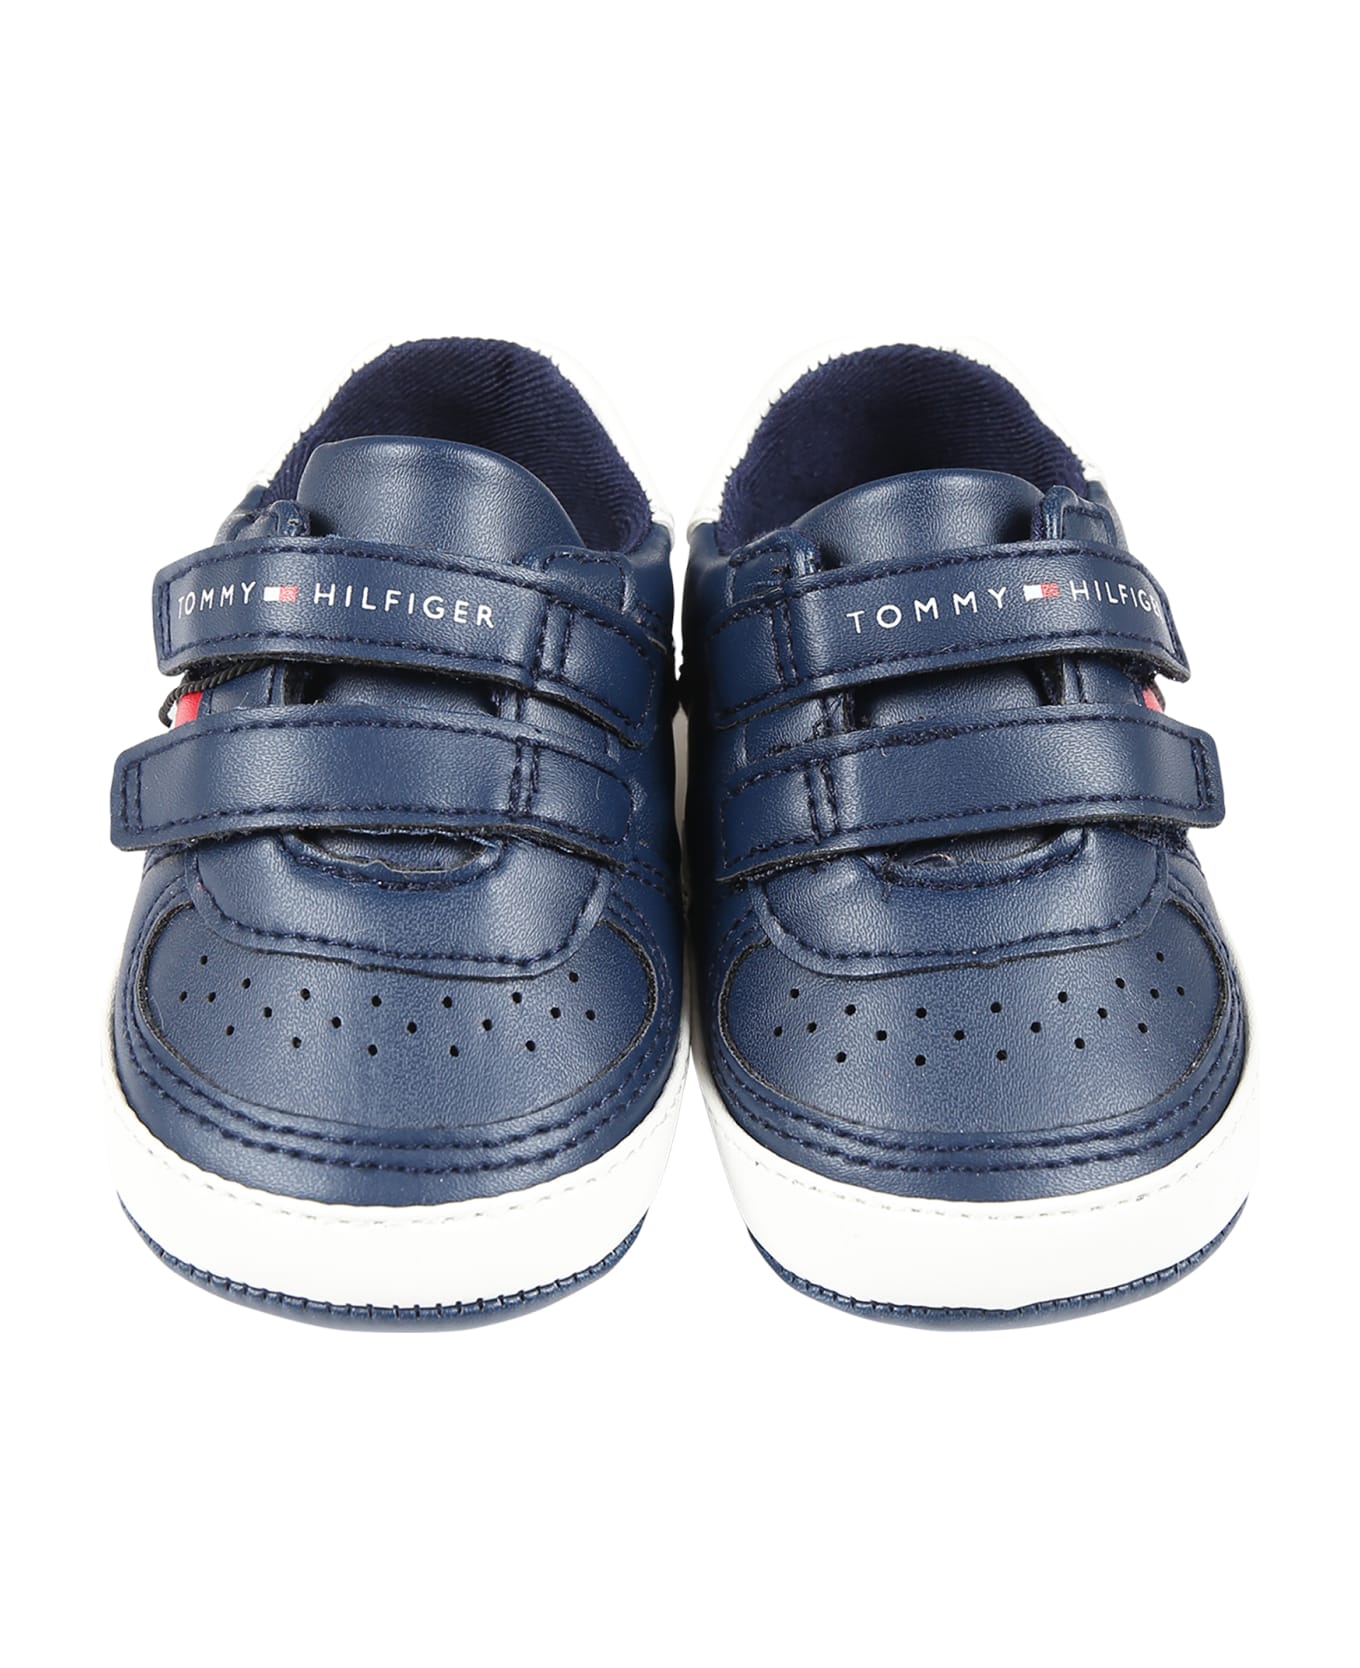 Tommy Hilfiger Blue Sneakers For Baby Boy With Logo - Blue シューズ